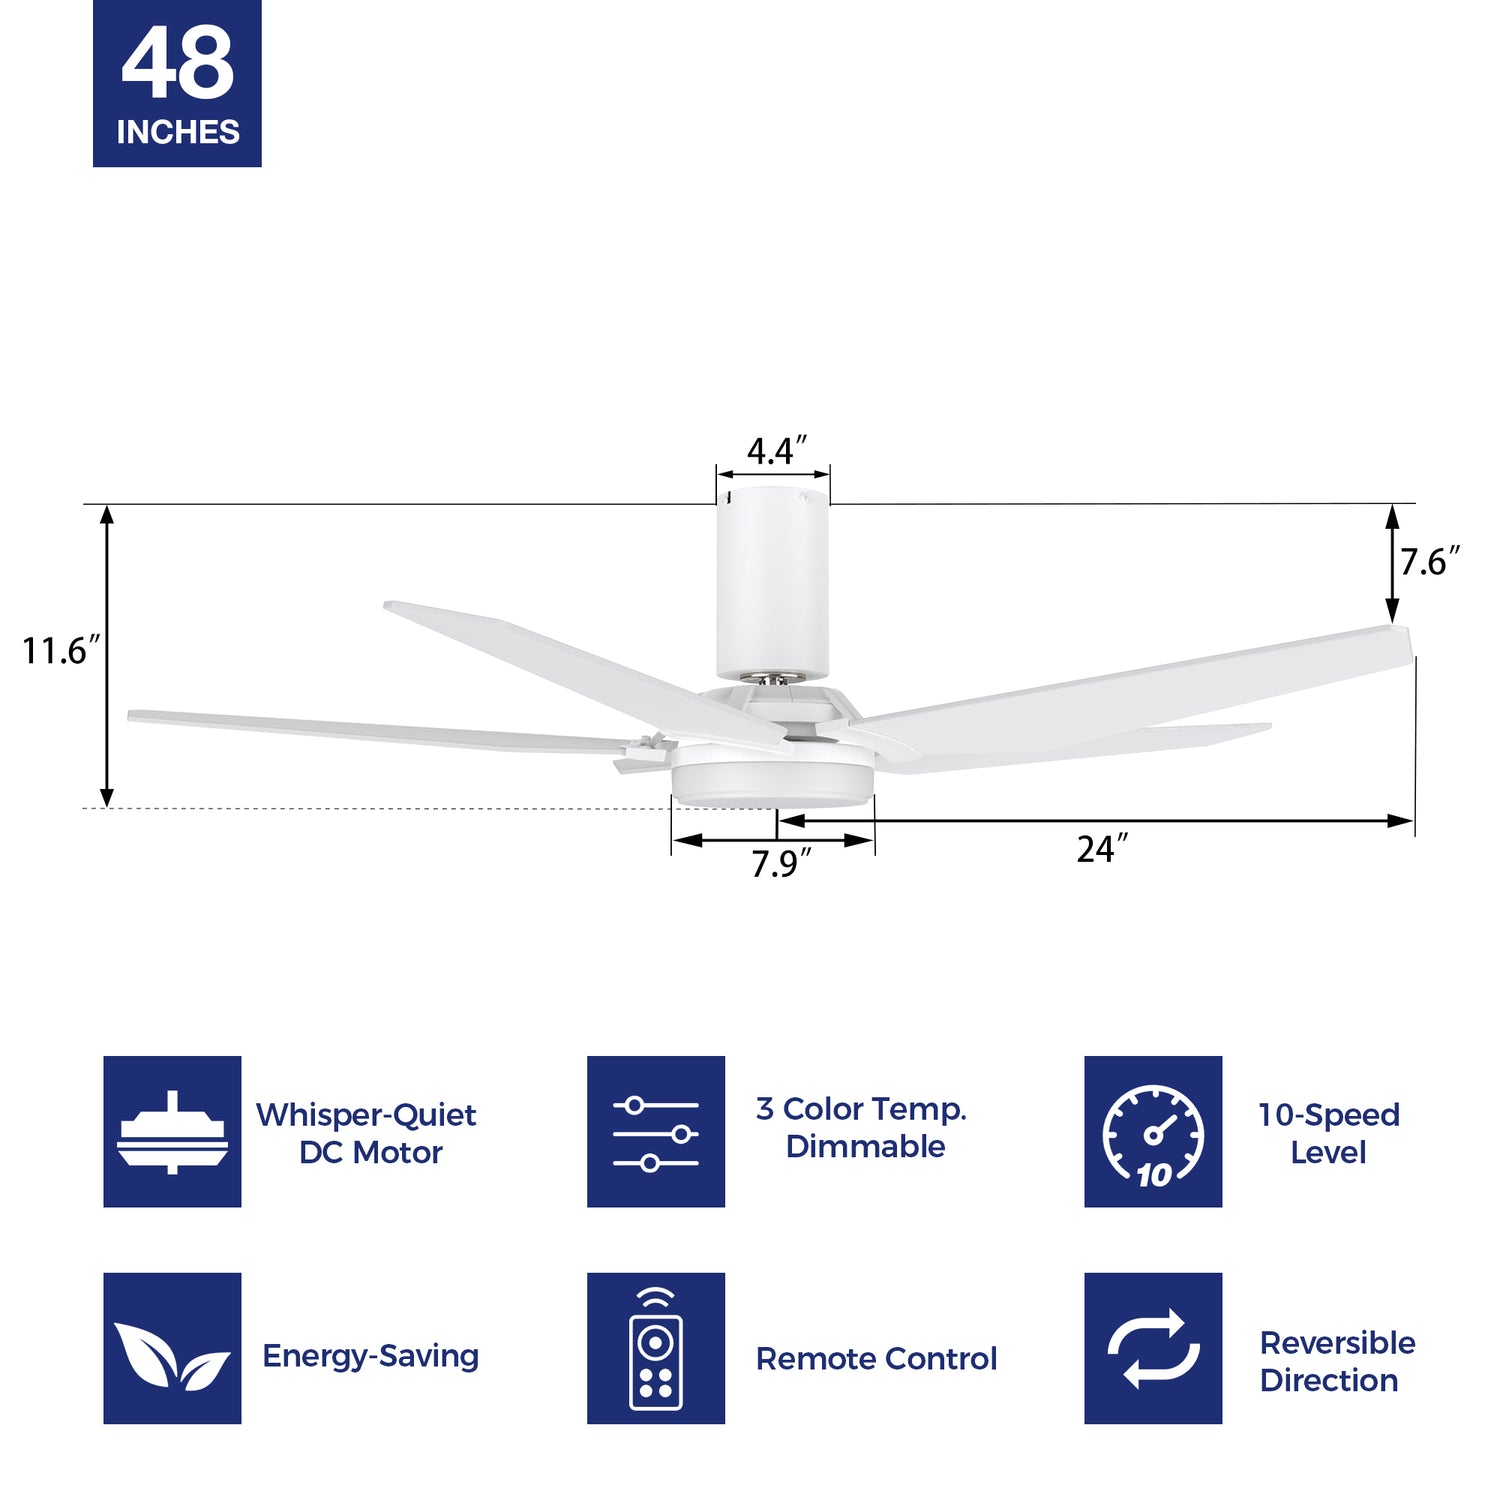 Transform your space with a 48-inch low-profile ceiling fan.  Revel in the convenience of a remote-controlled 10-speed adjustable DC motor, 3-color temperature dimmable light, and efficient 3600 CFM airflow.  Enjoy whisper-quiet cooling in style with the energy-efficient DC motor.  The fan features 5-plywood blades for durability and high-quality performance. 